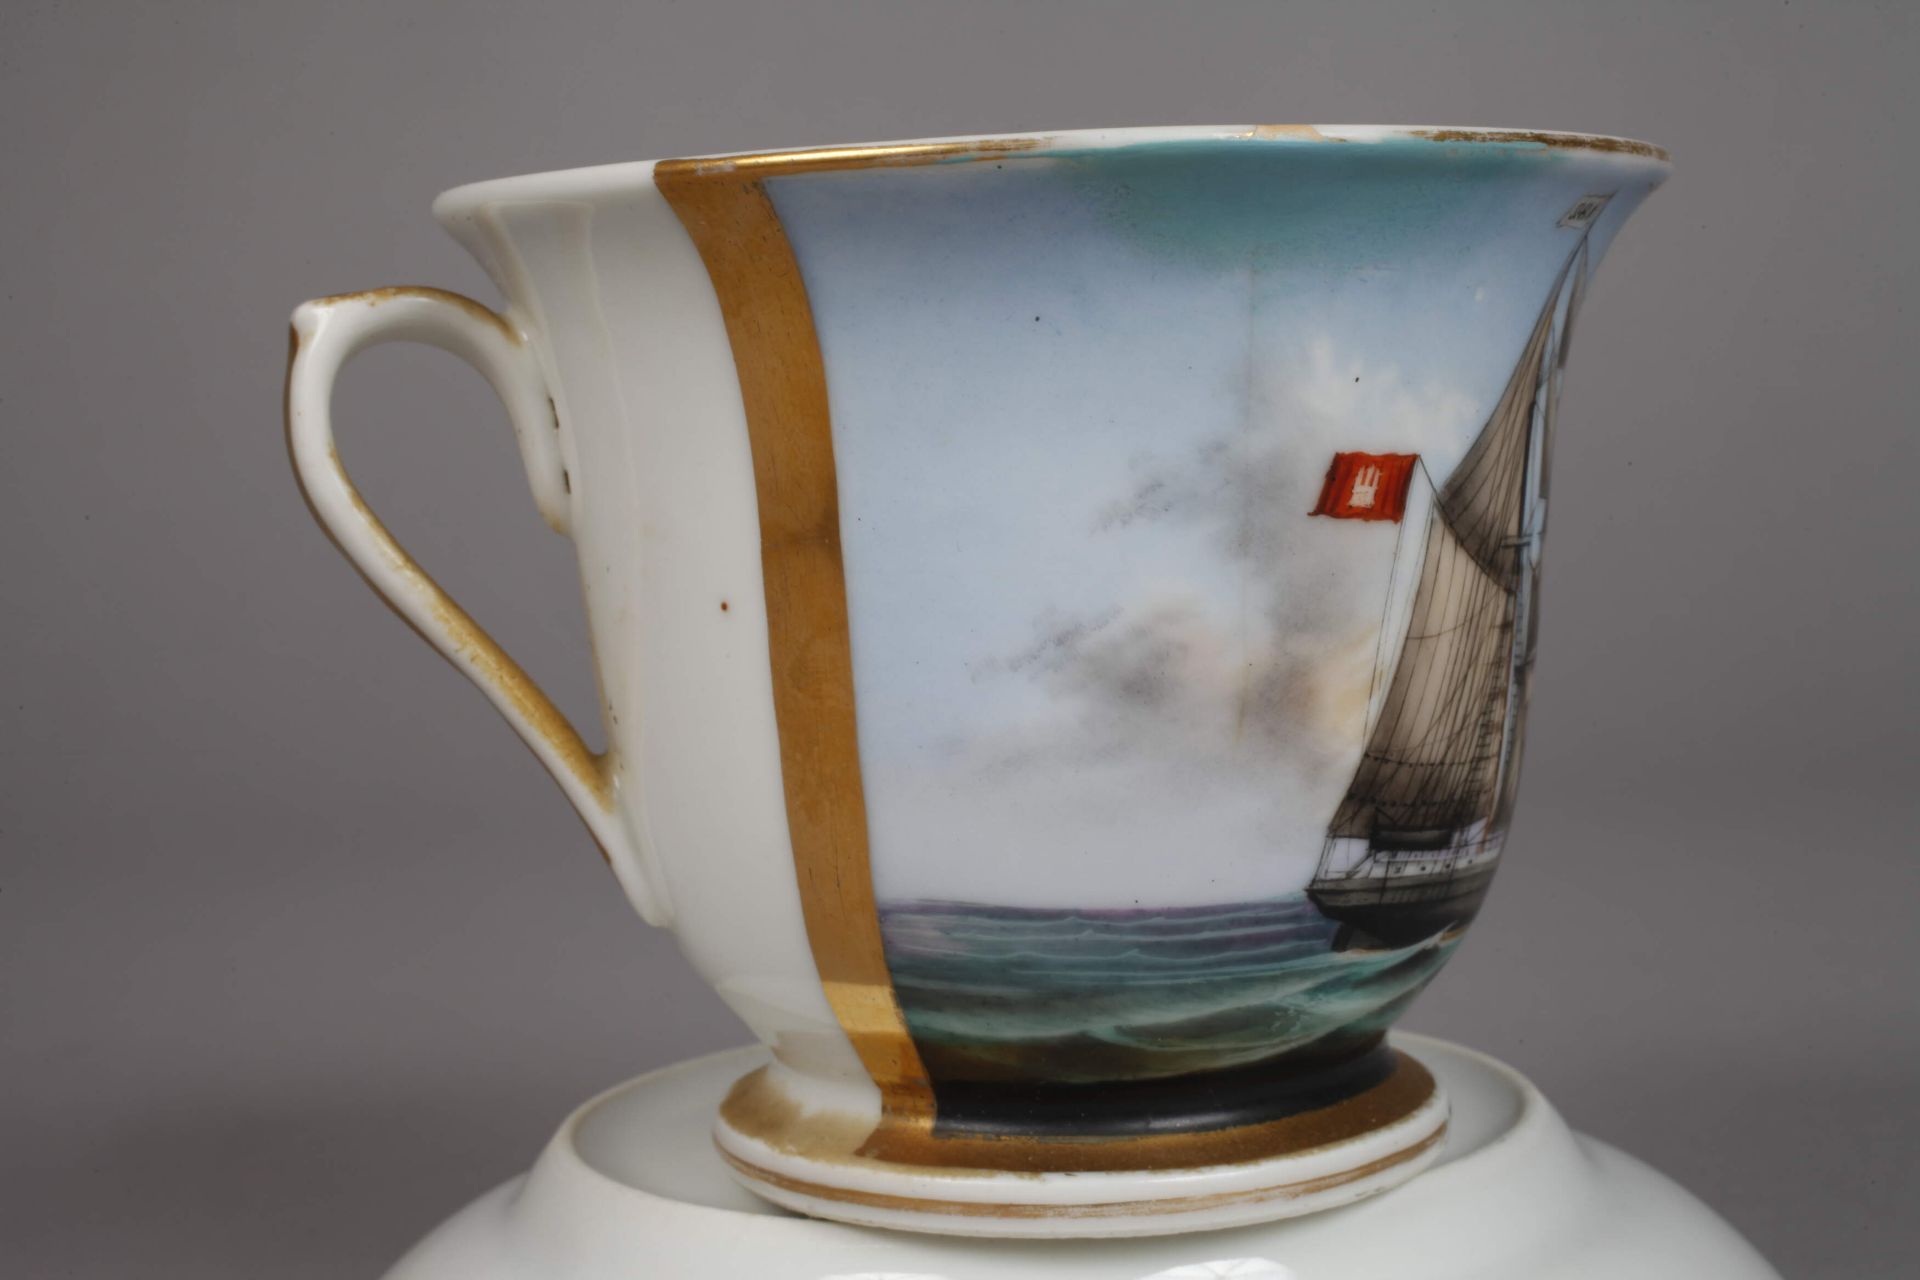 Captain's cup with sailing ship "Margarita" - Image 3 of 5